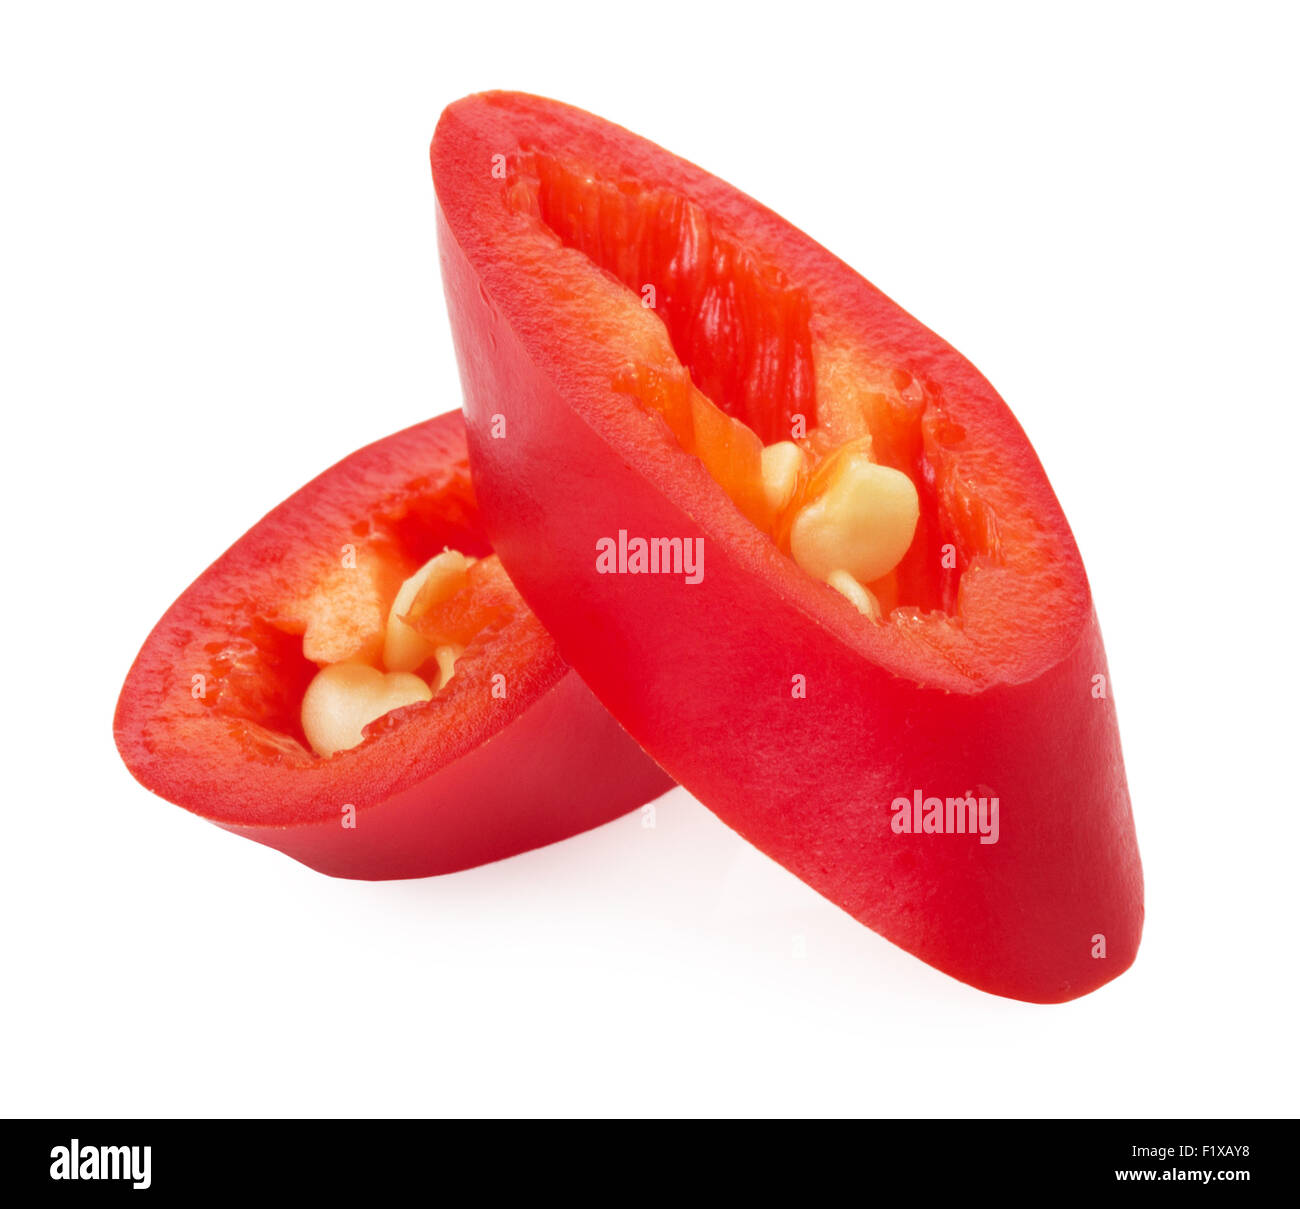 slices of red chilly pepper isolated on the white background. Stock Photo